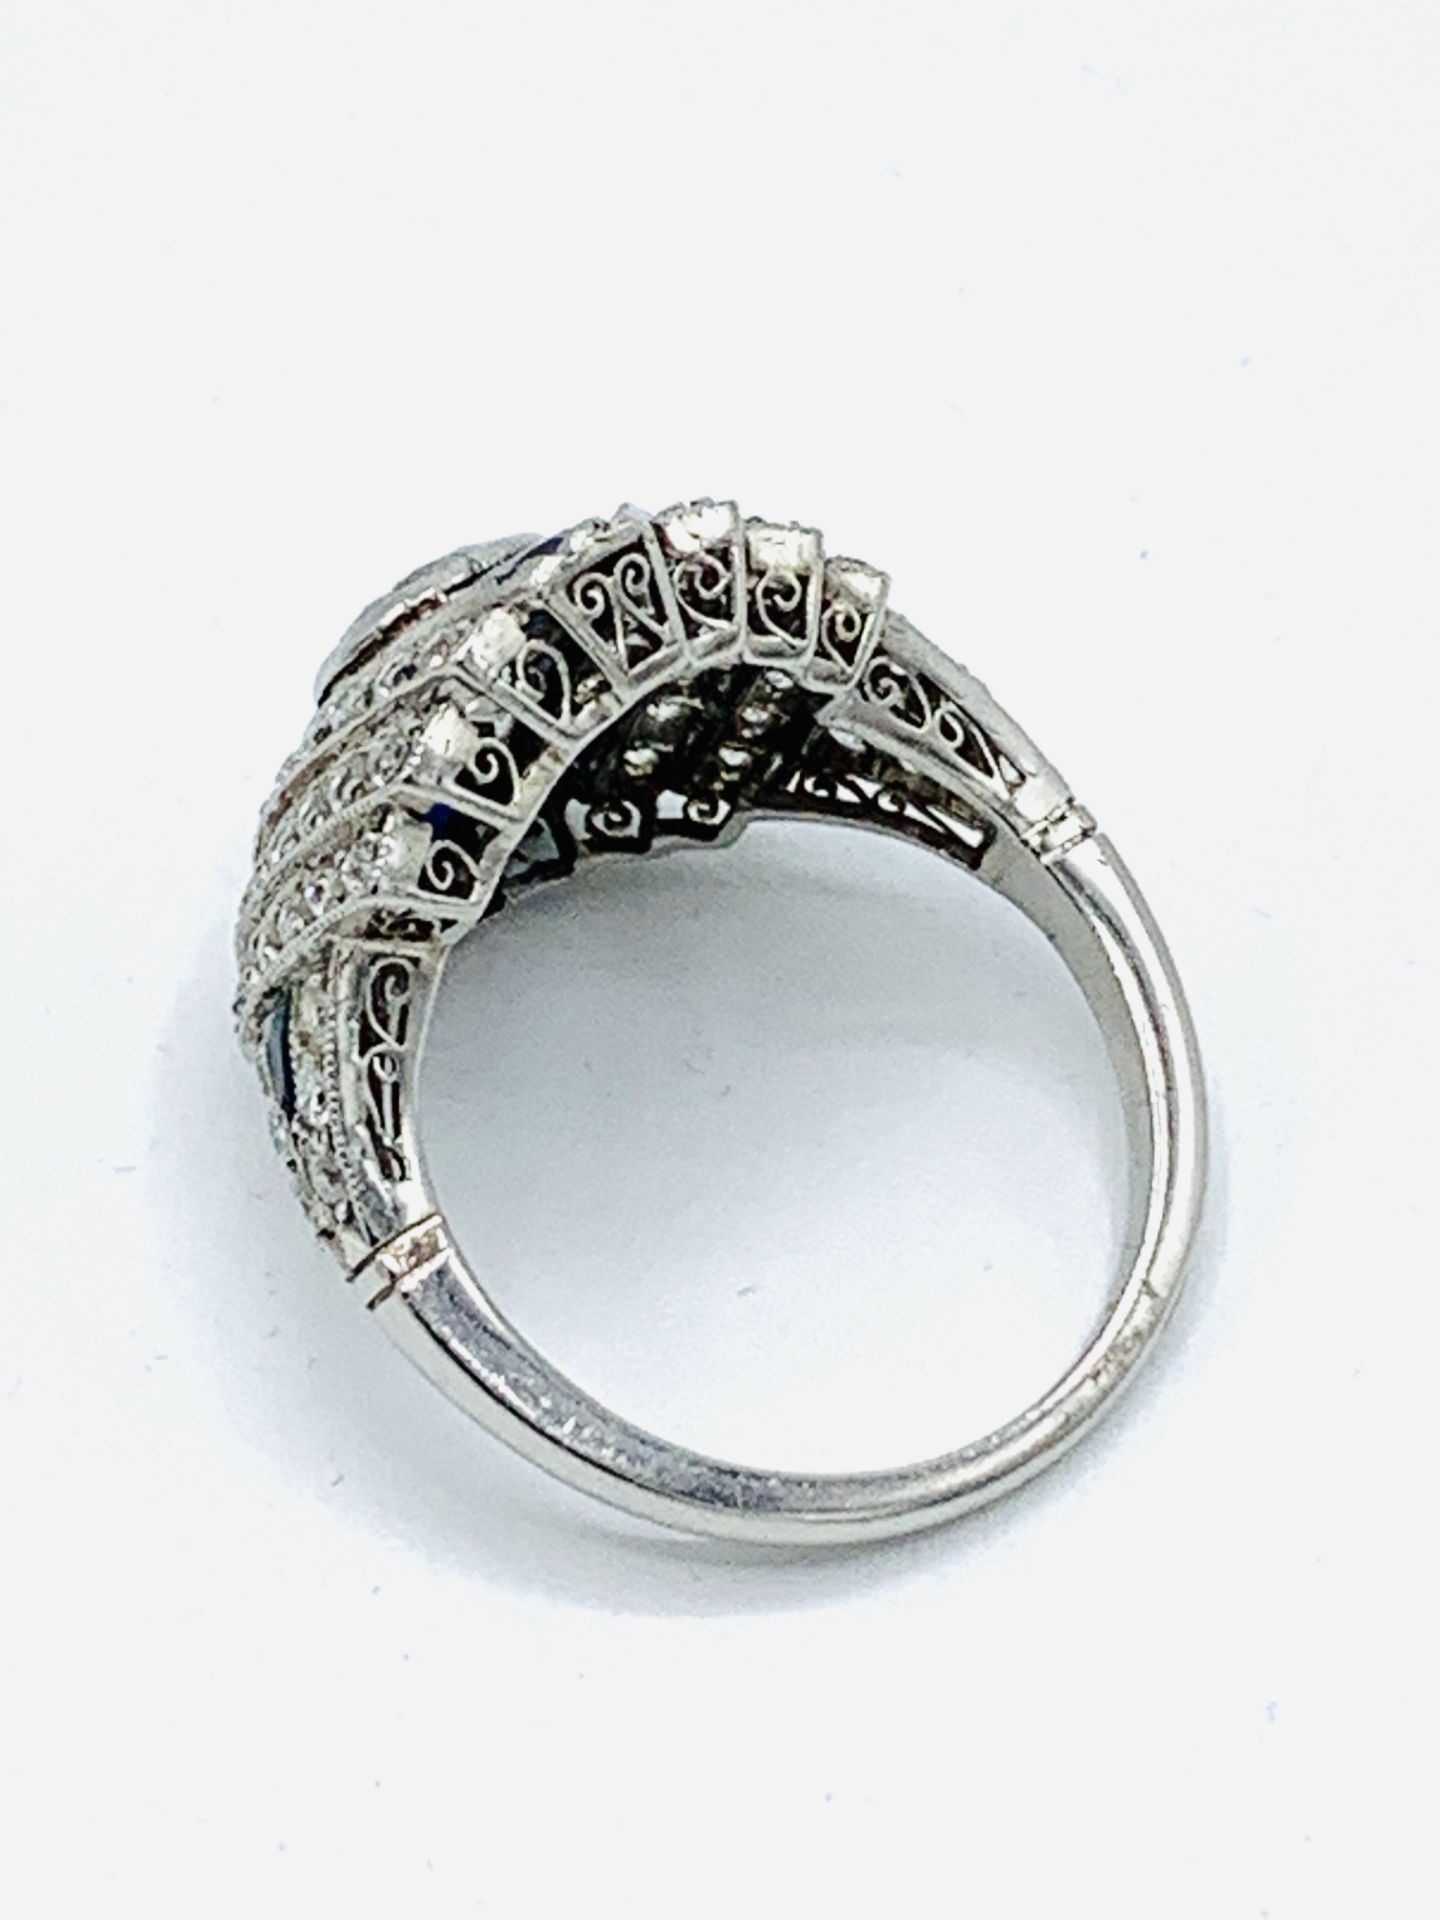 Art Deco white gold diamond and sapphire ring. Size O 1/2 Wt. 7.8gms. Size of centre diamond 6.3m - Image 4 of 7